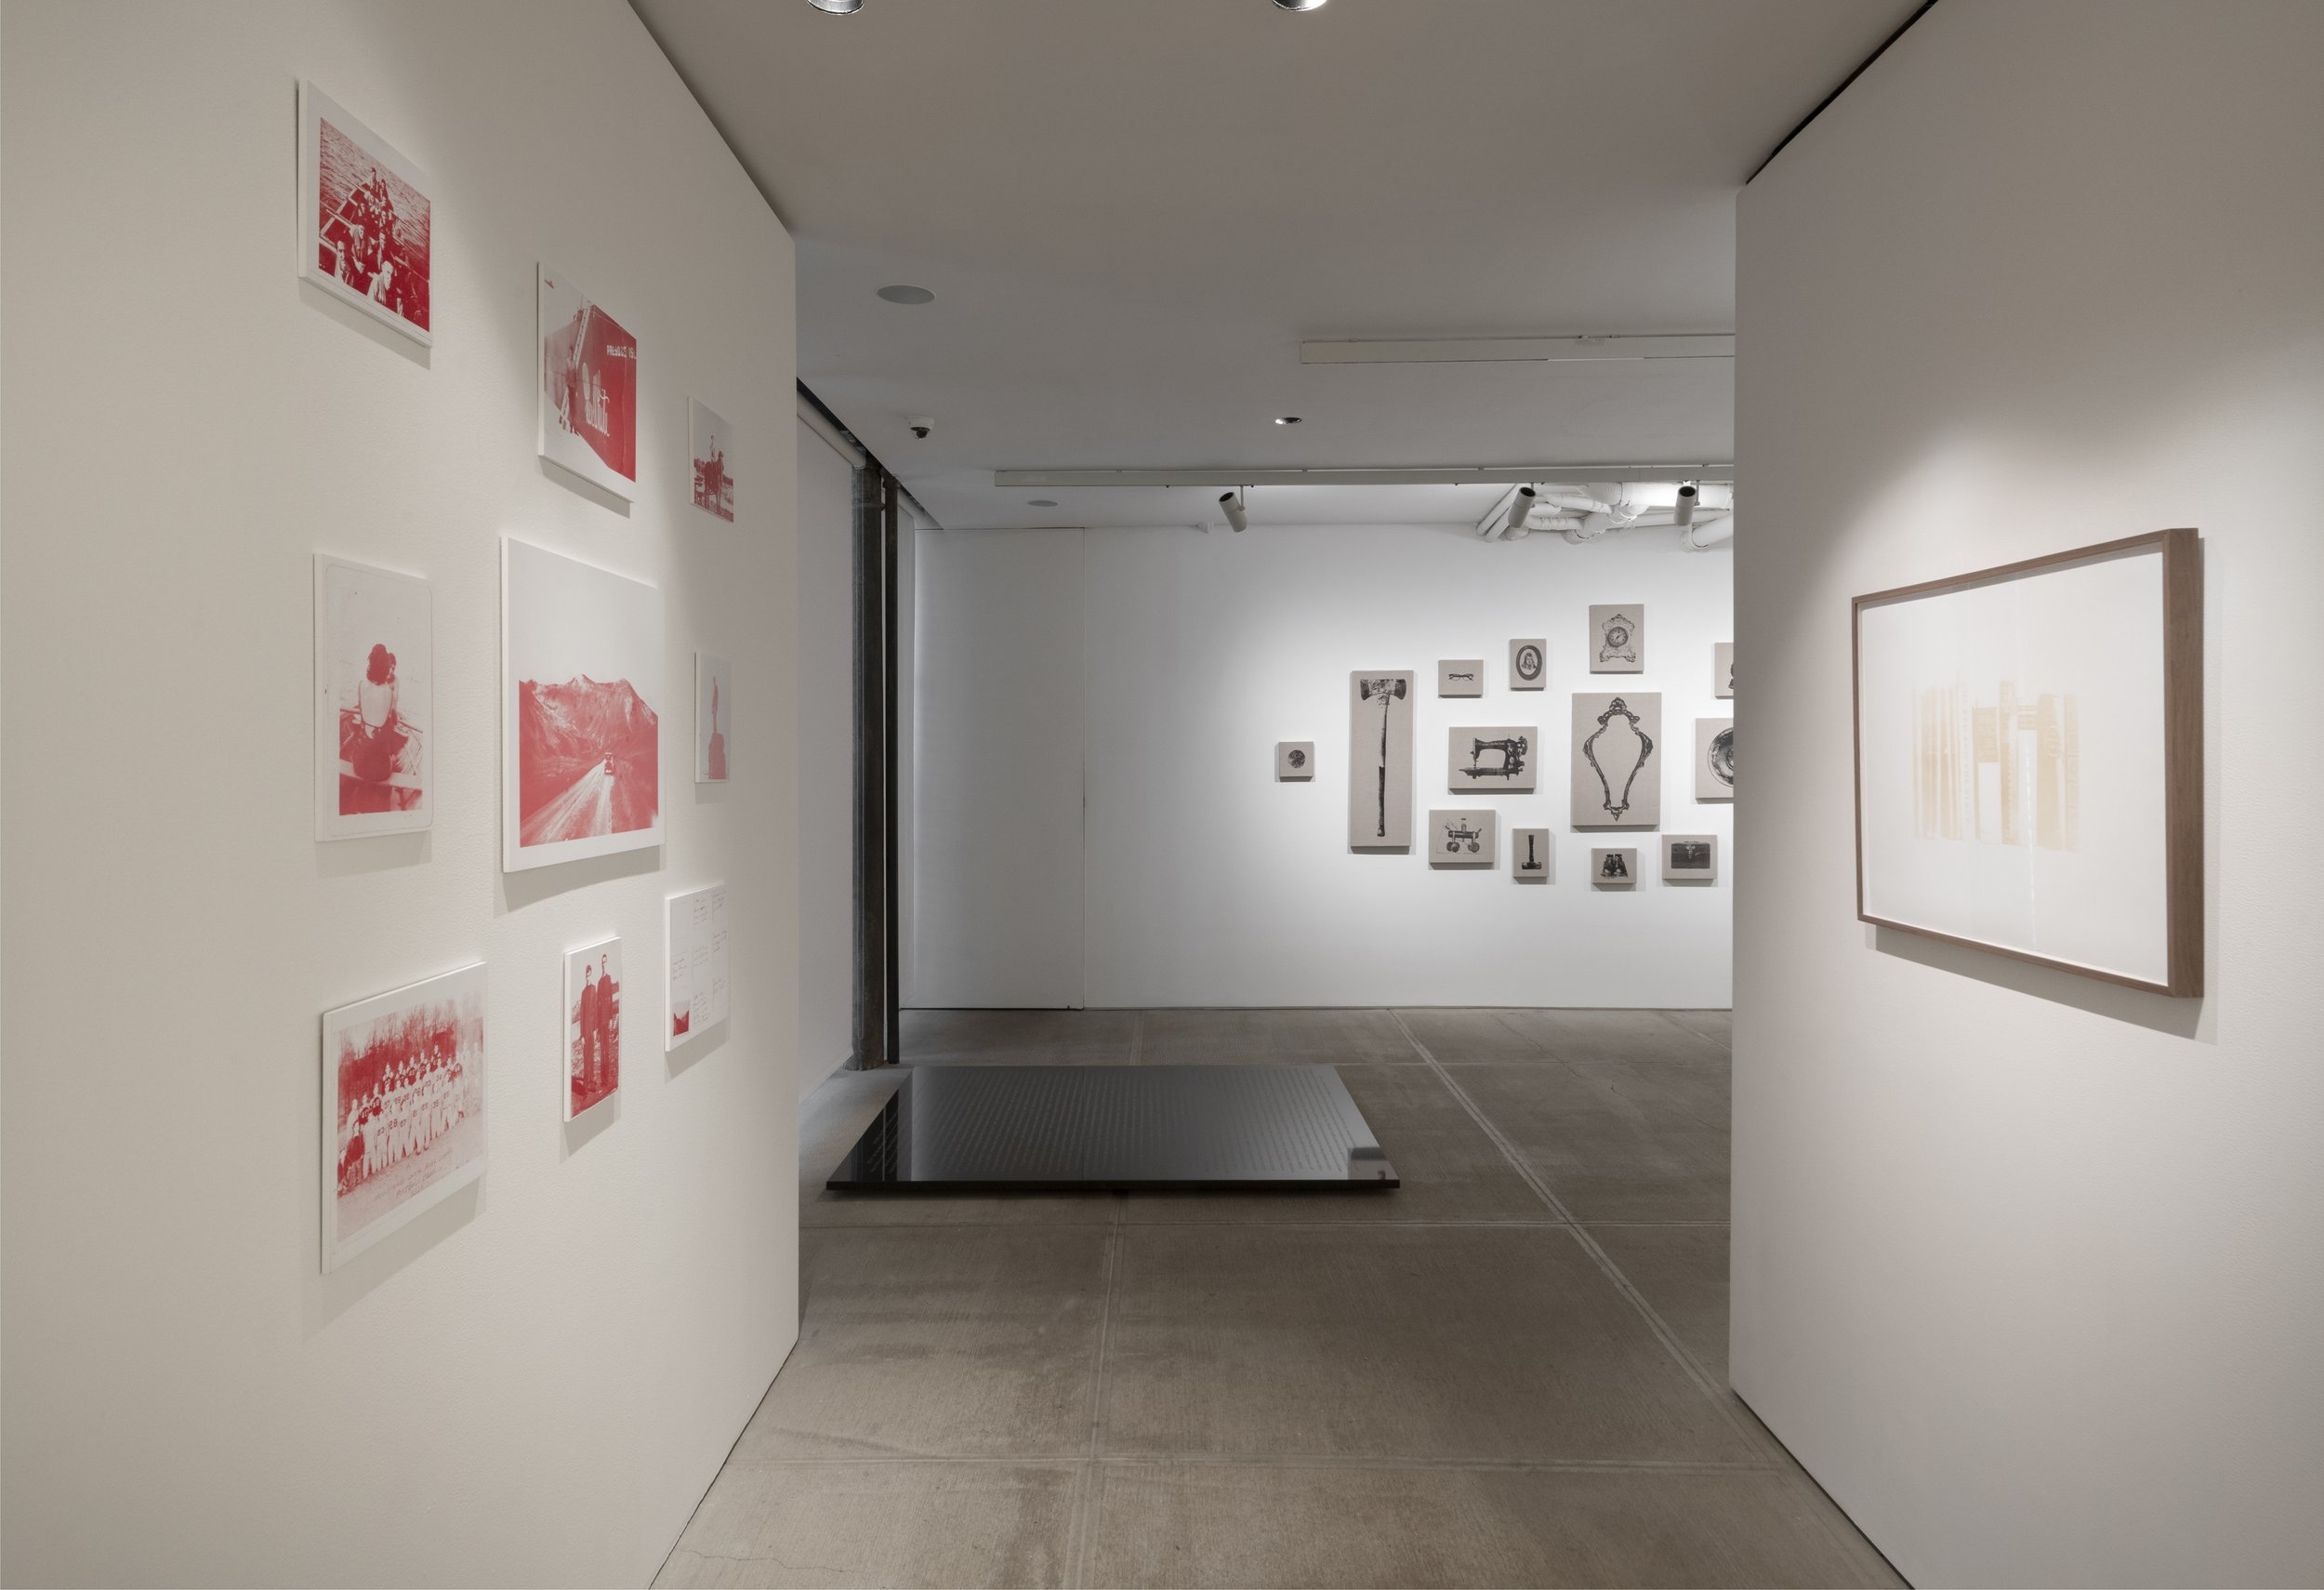 TOTAH_TRE-Letters from Home Installation View 4.jpg